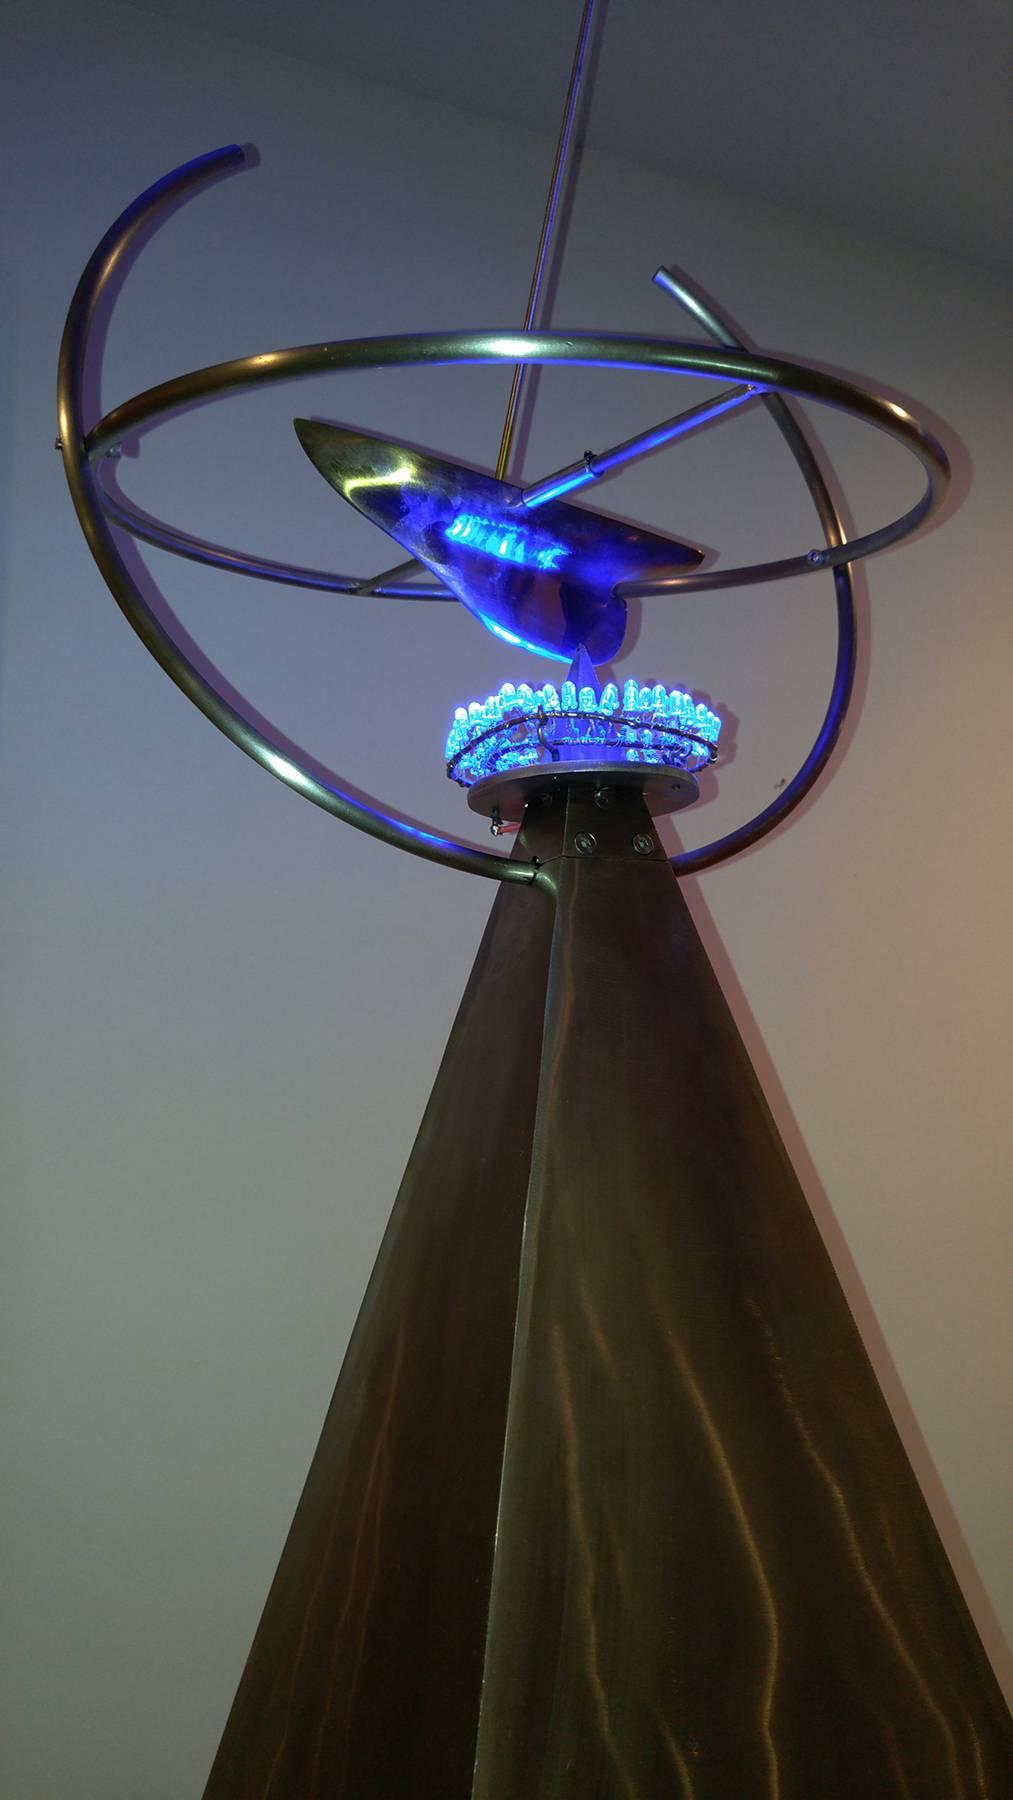 Symmetrical Joy 77x17x17, Stainless Steel and polished bronze with LED lighting, - Contemporary Sculpture by Robert Roesch